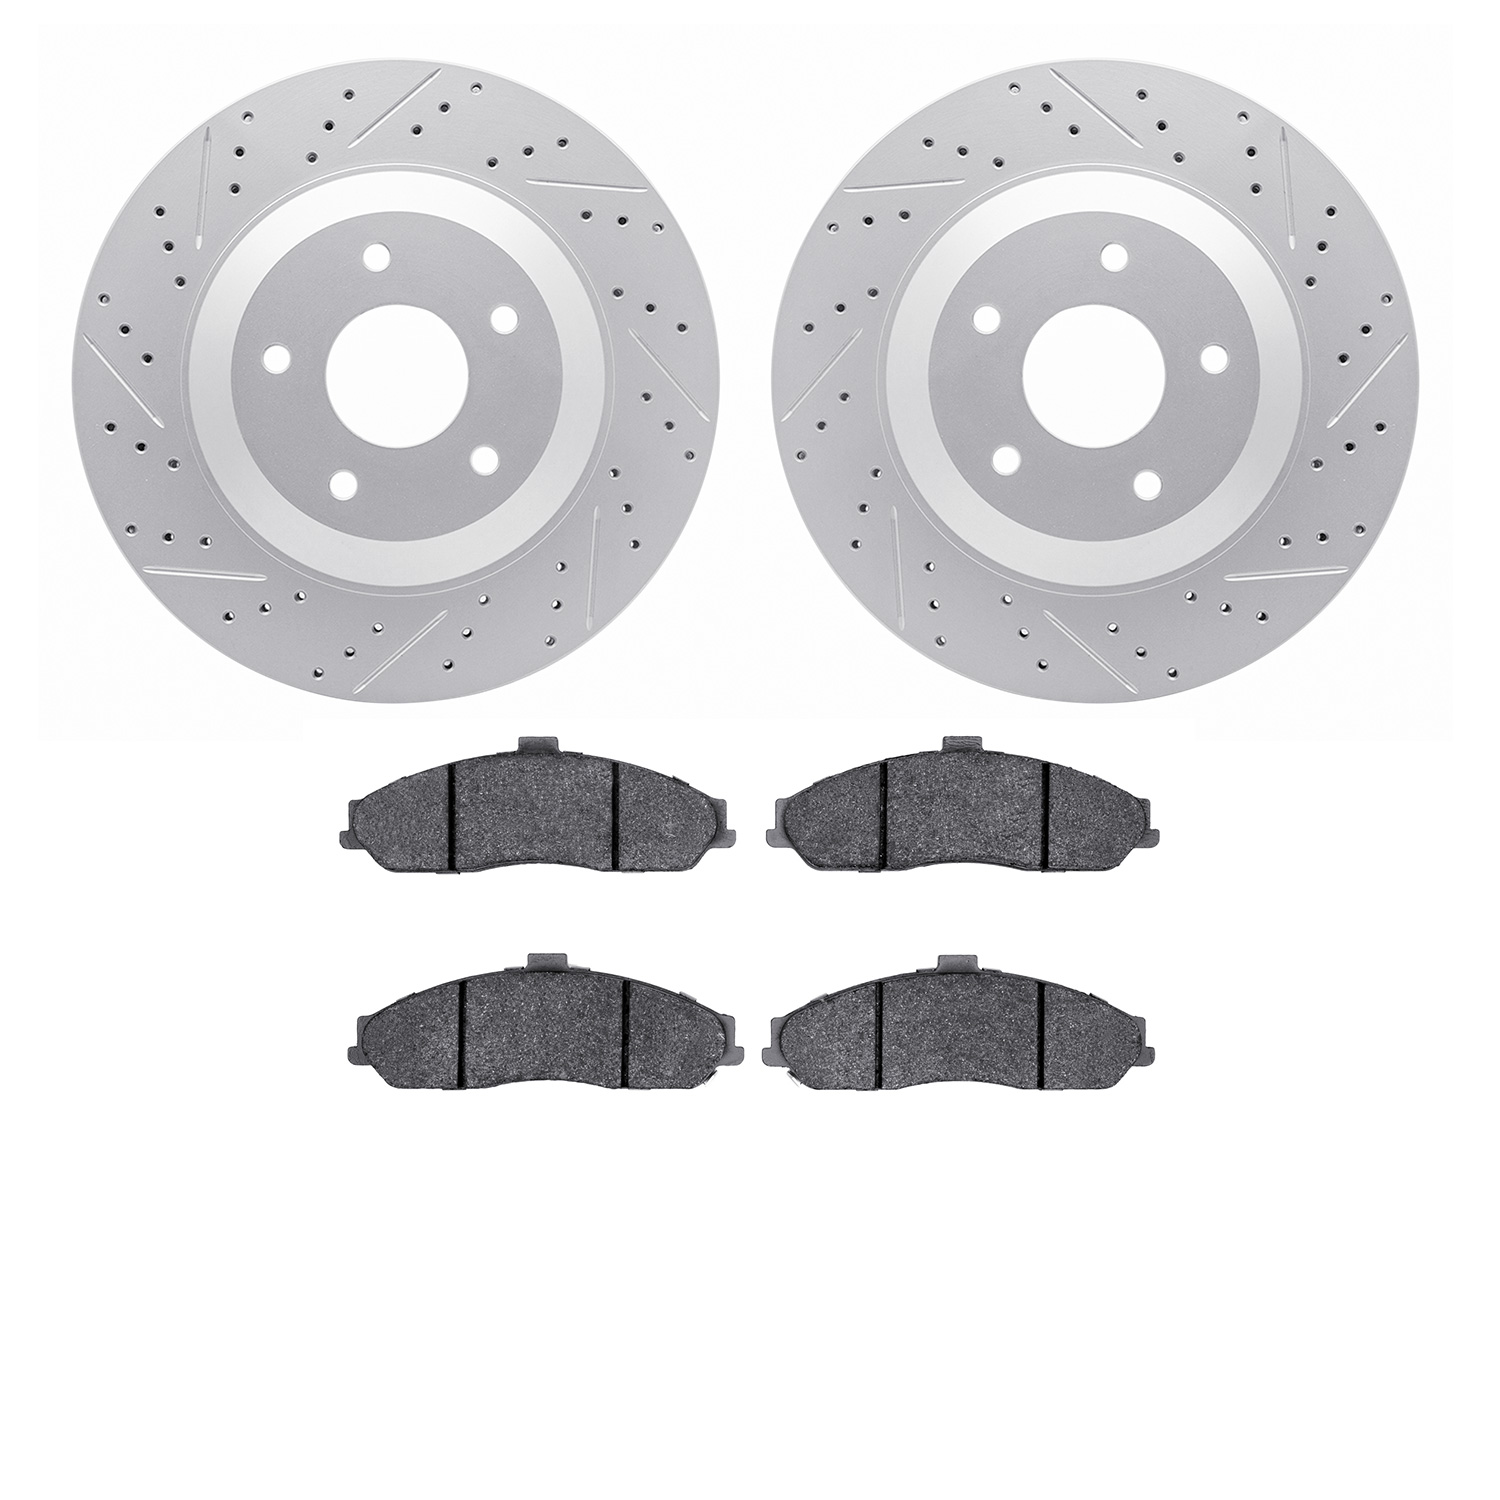 2502-46040 Geoperformance Drilled/Slotted Rotors w/5000 Advanced Brake Pads Kit, 1997-2009 GM, Position: Front